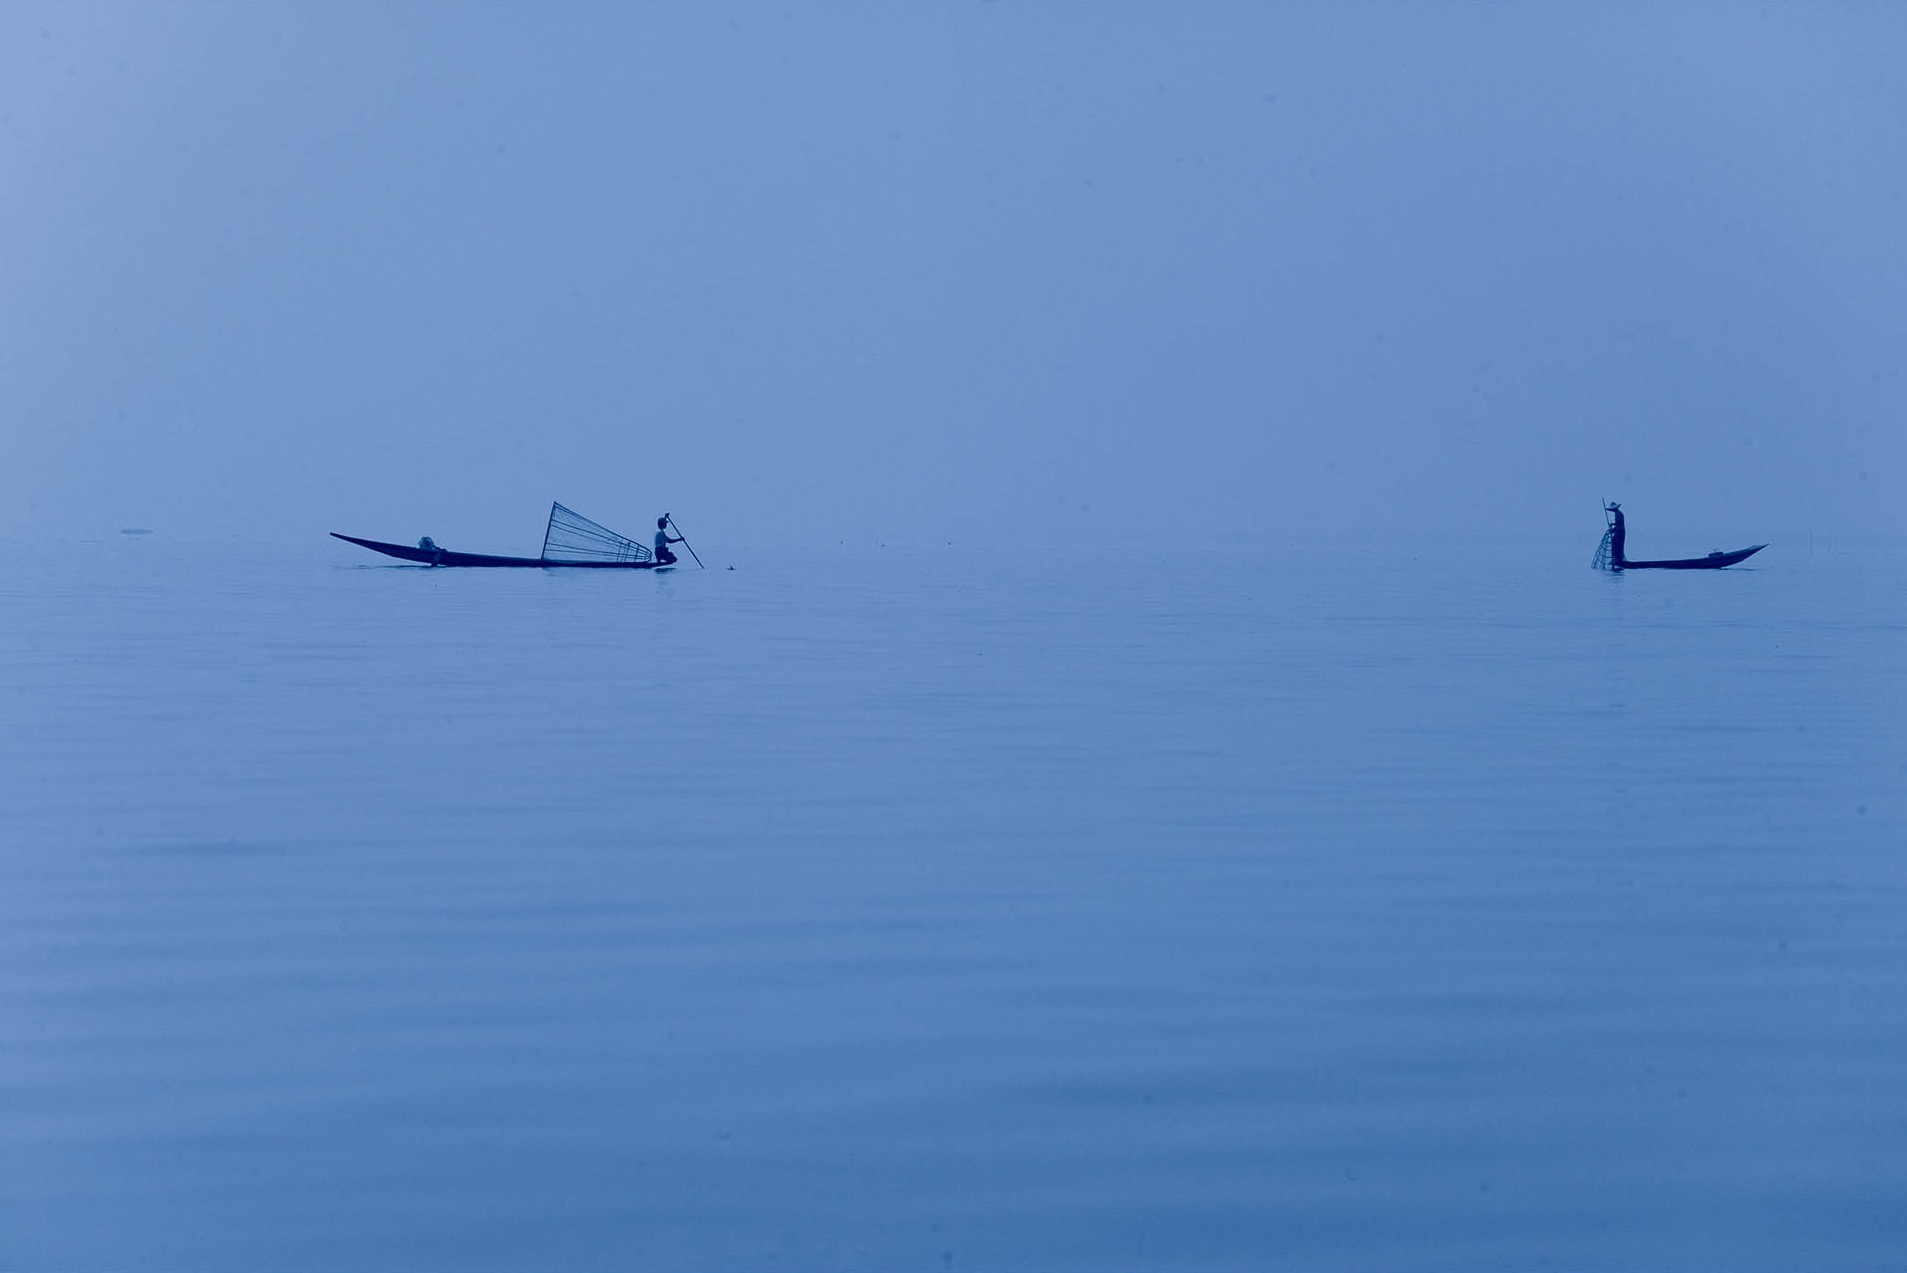 Two people in self-propelled boats glide across the water.